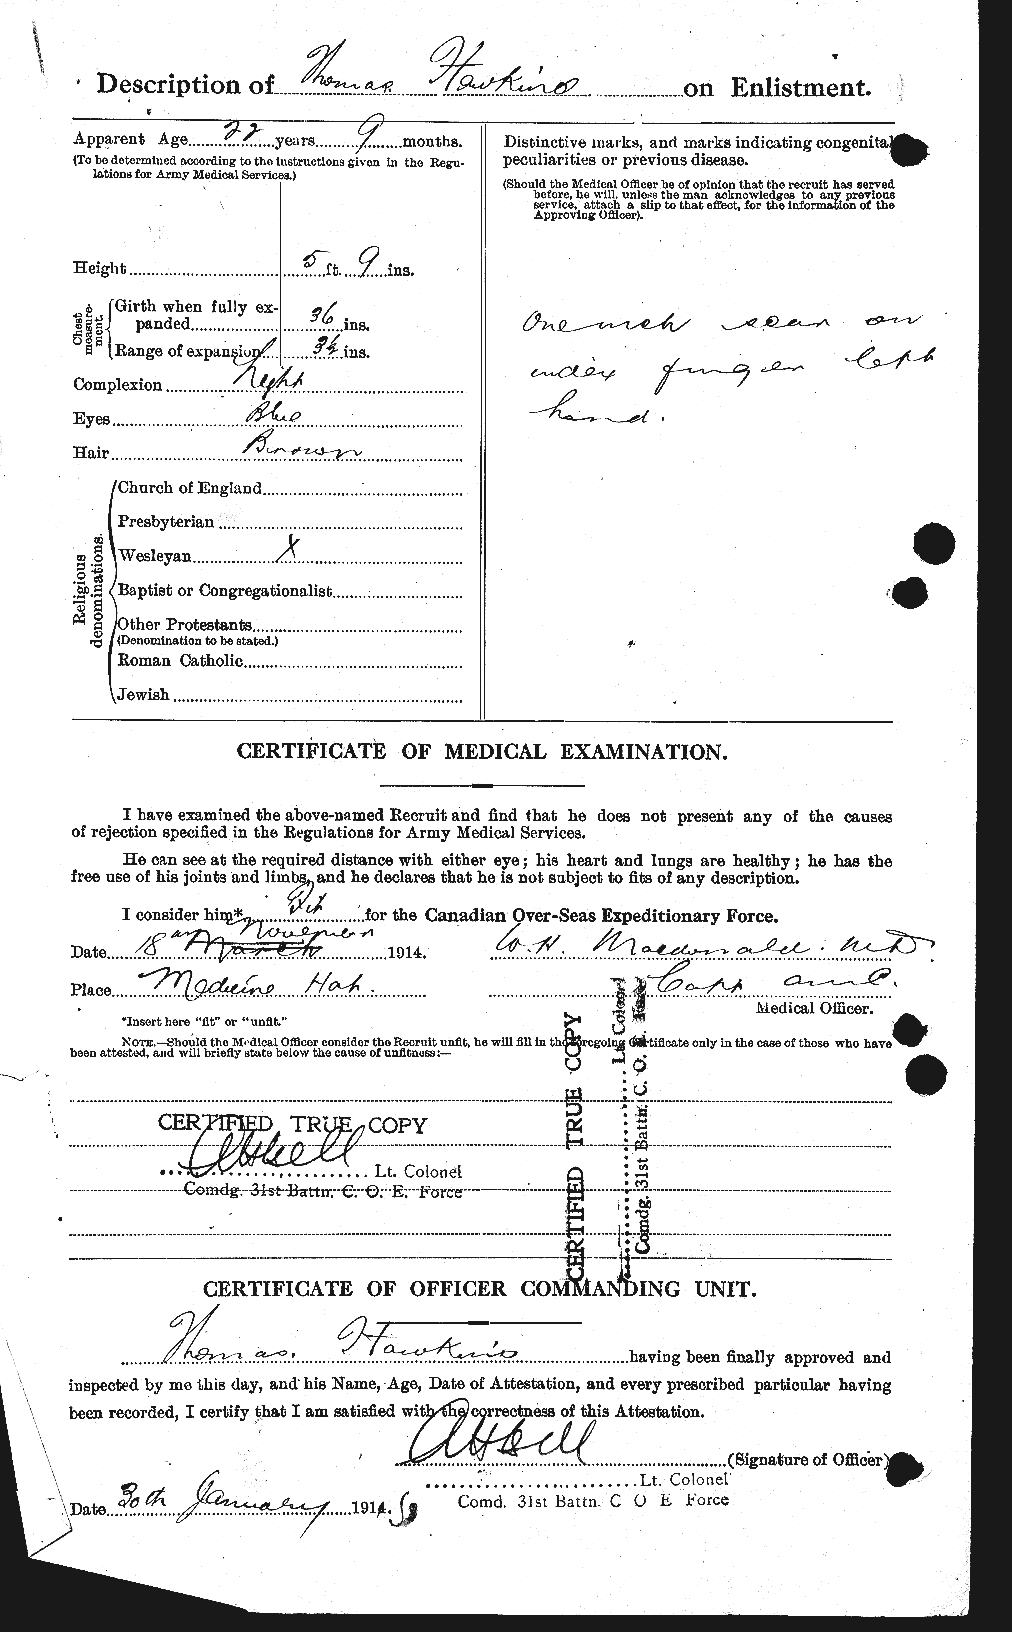 Personnel Records of the First World War - CEF 385617b